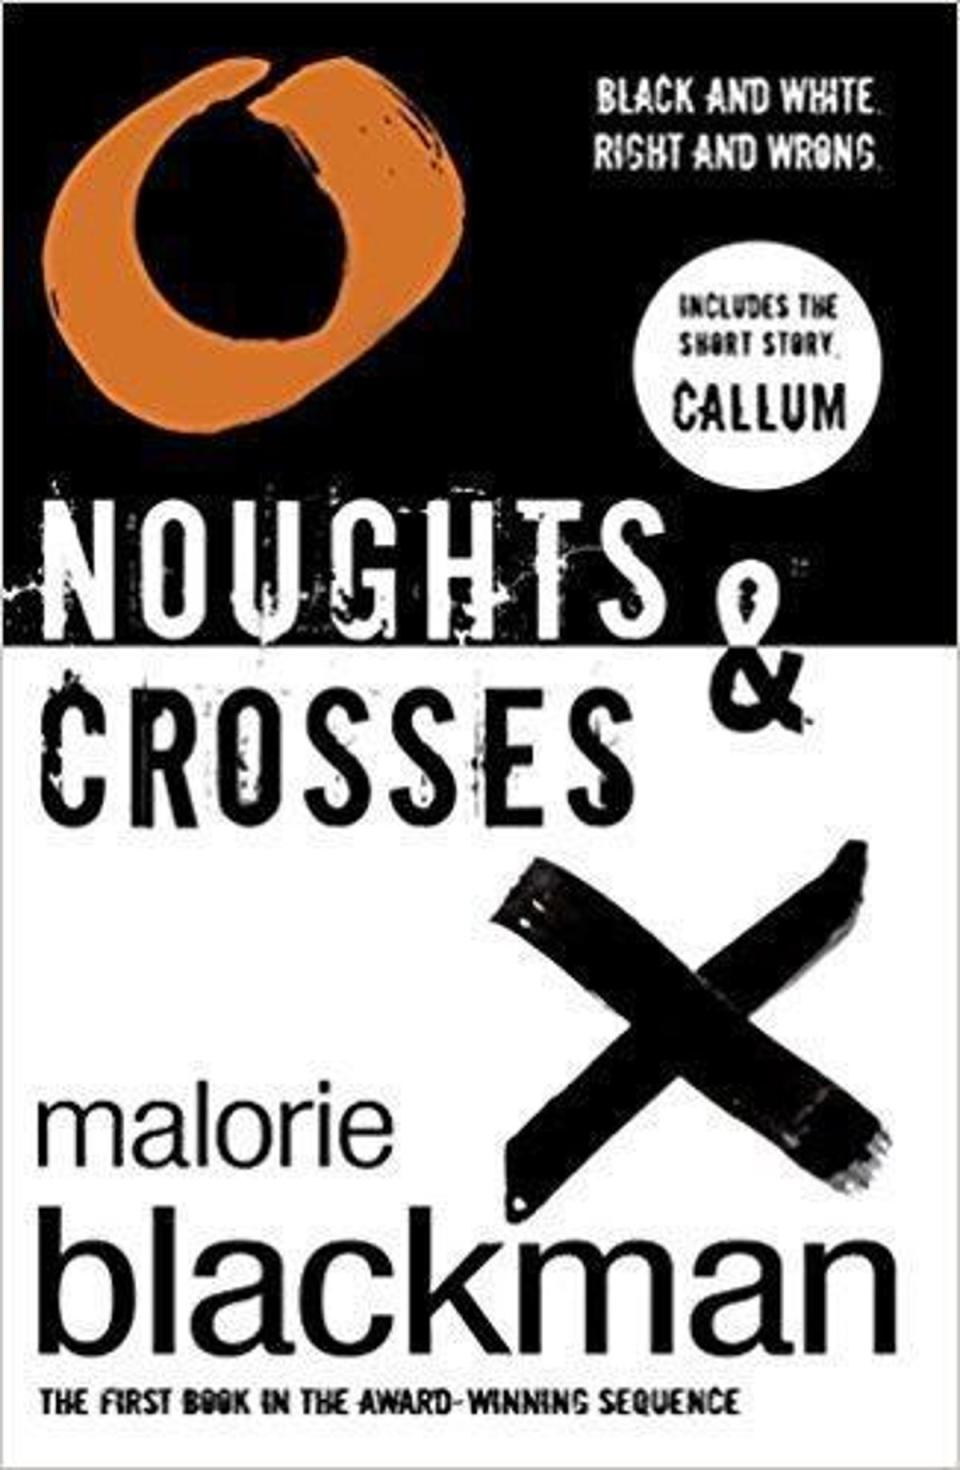 26. Noughts and Crosses by Malorie Blackman (2001): 